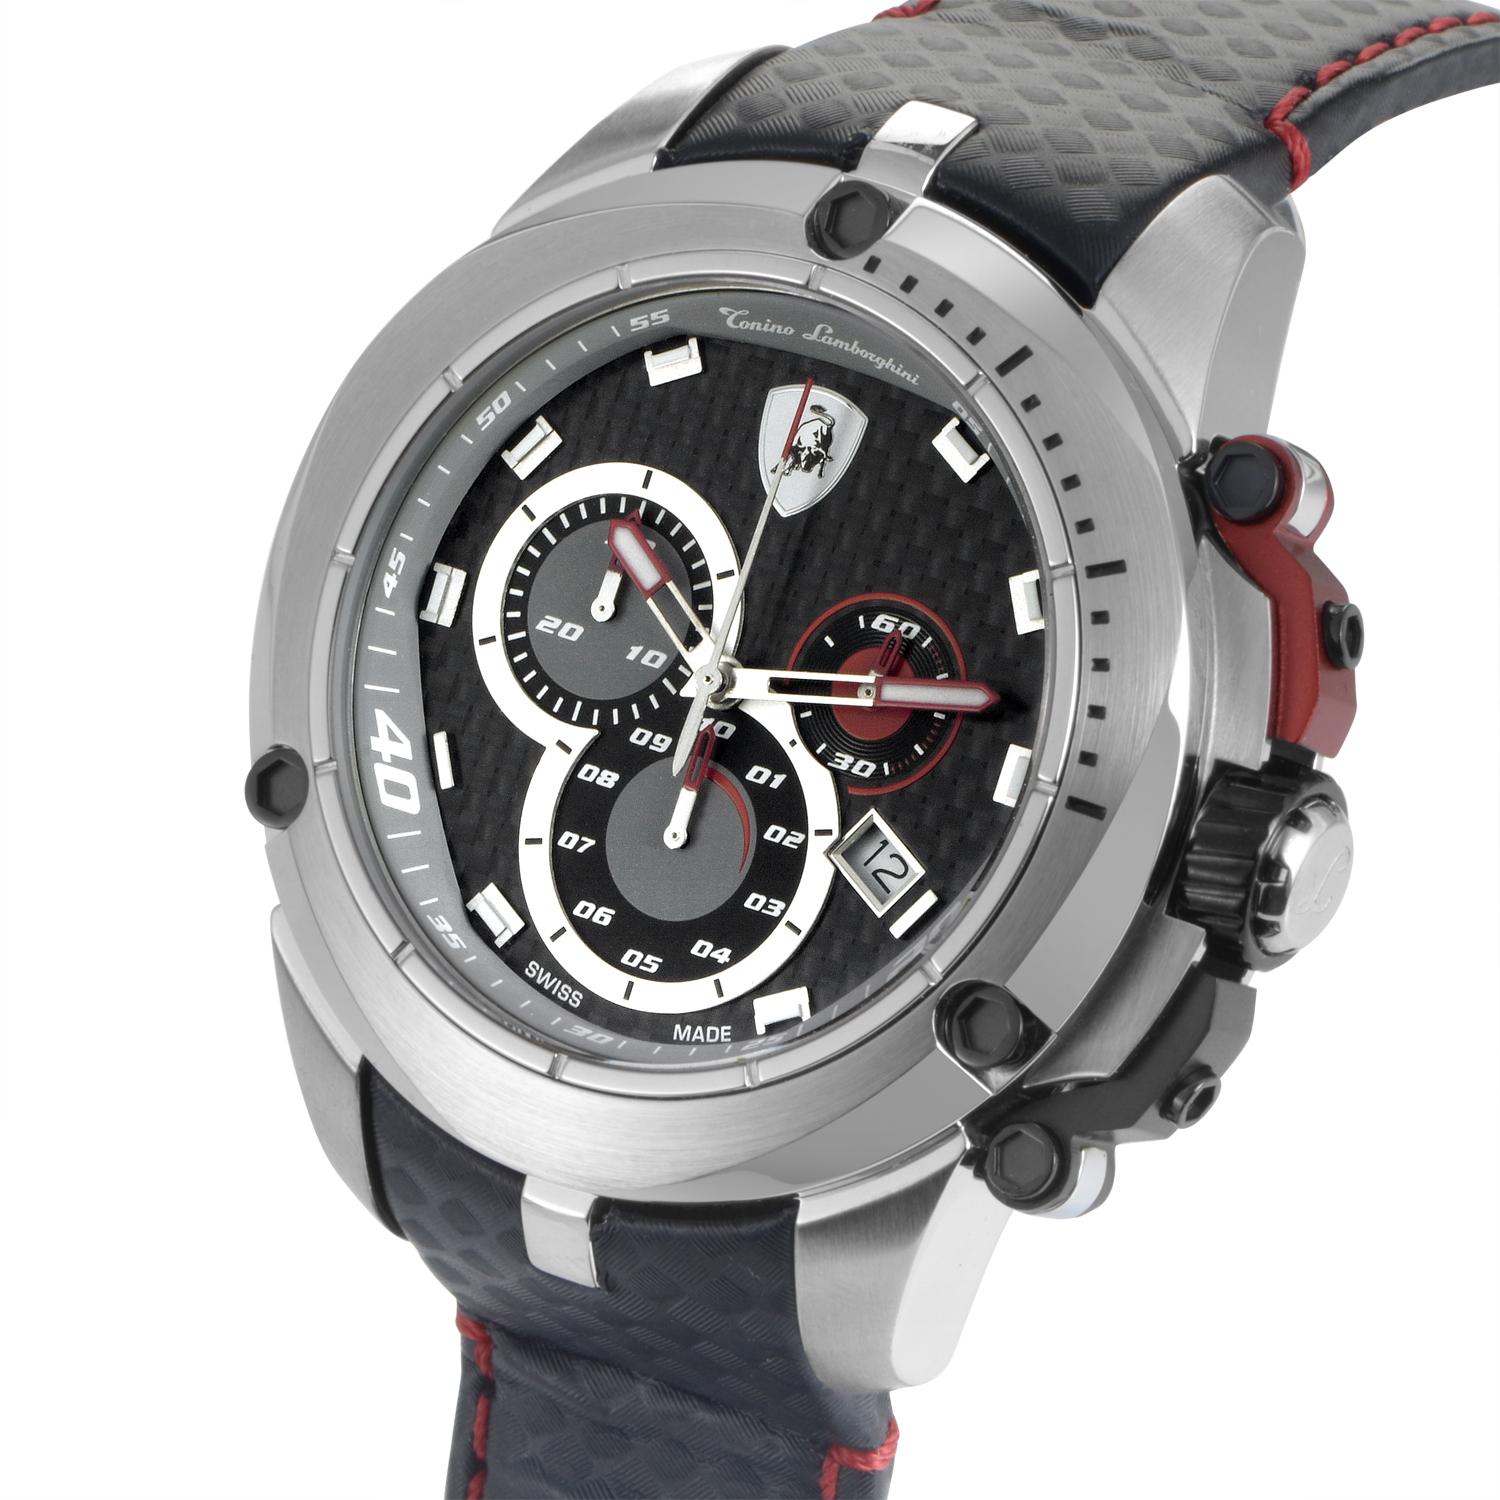 This sporty timepiece from Tonino Lamborghini is for the gentleman that enjoys all things luxurious. The case is made of polished stainless steel and features a carbon fiber dial with chronograph subdials. The dial also displays the standard hours,